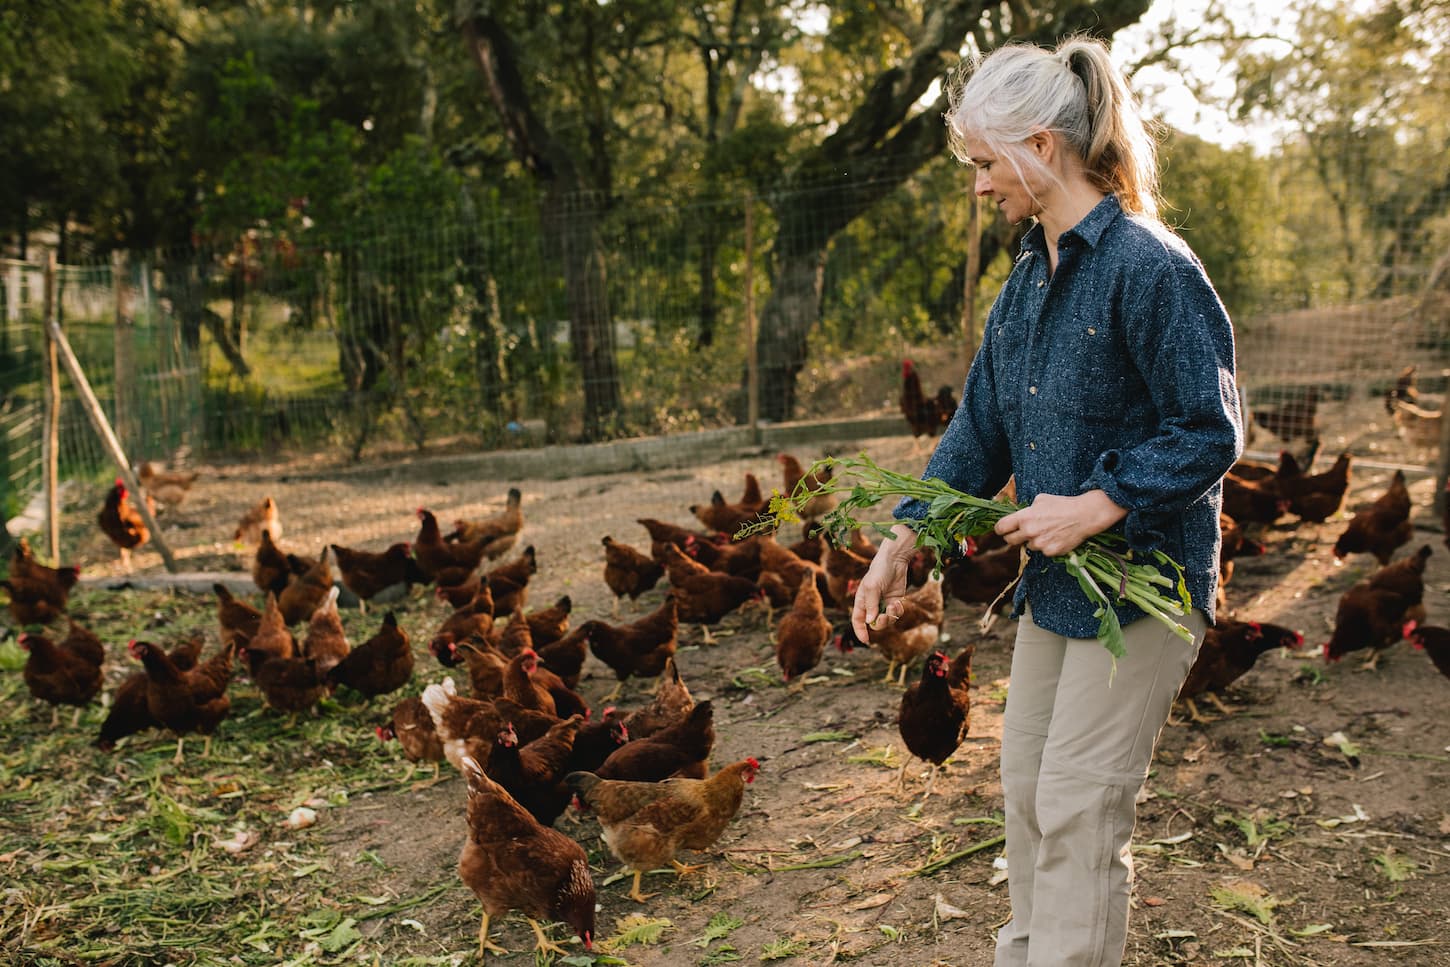 An image of a senior woman feeding chickens in the backyard.